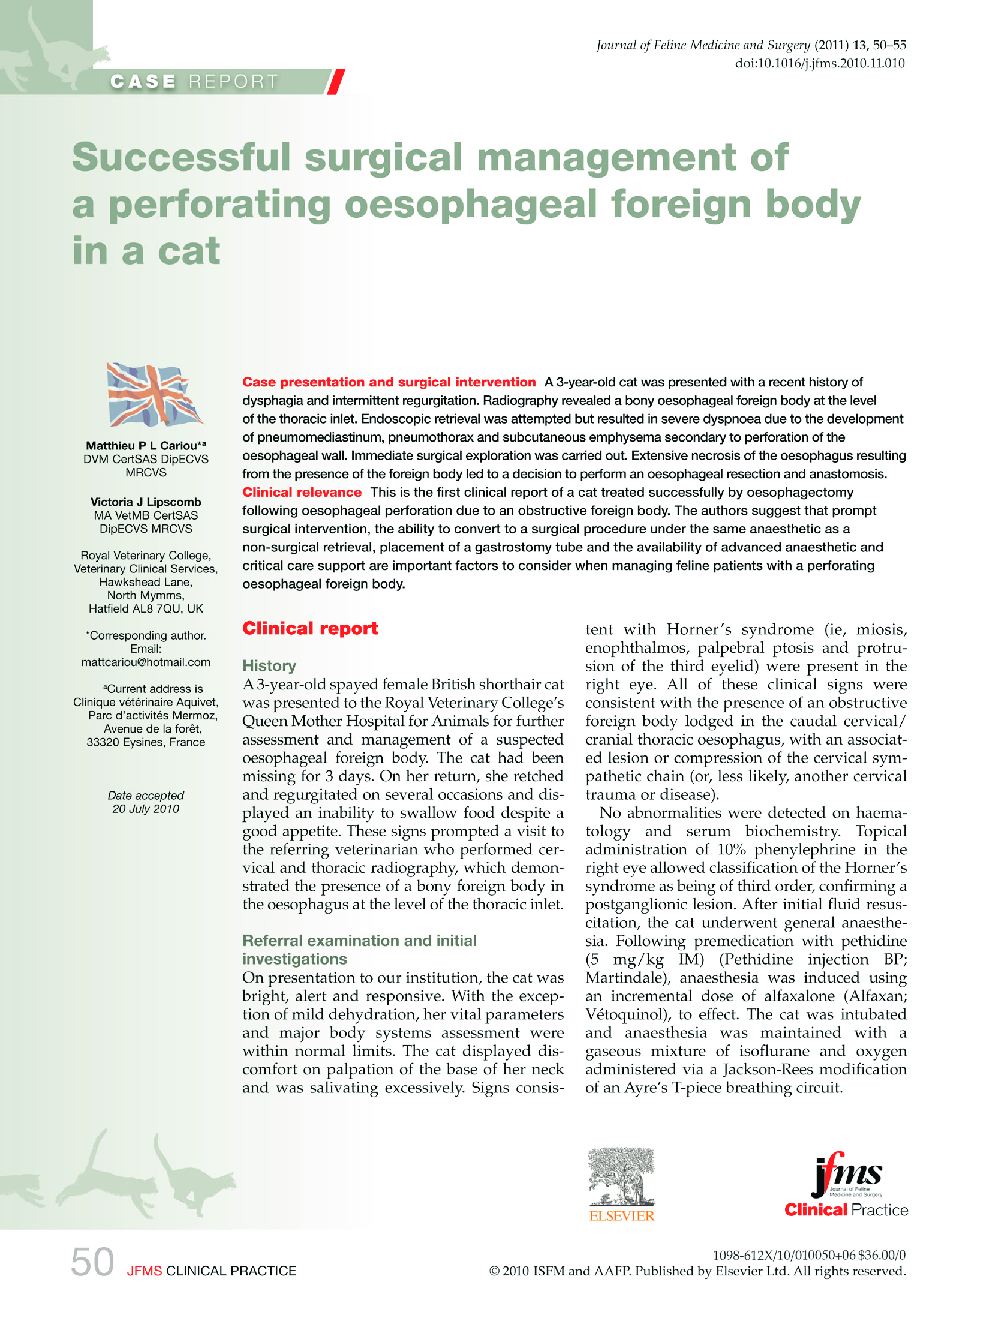 Successful surgical management of a perforating oesophageal foreign body in a cat